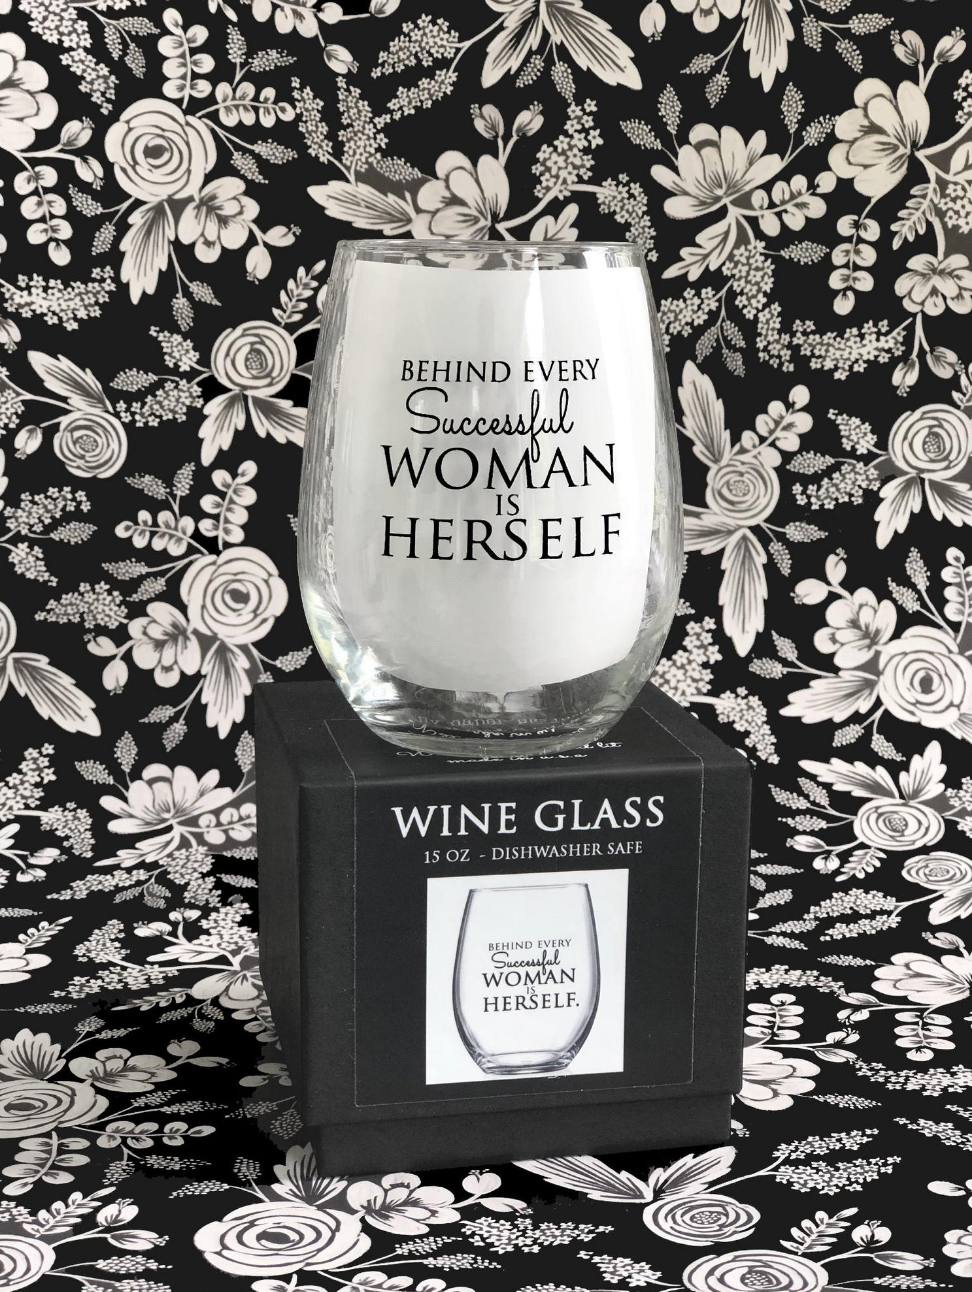 Behind Every Successful Woman is Herself- Wine Glass